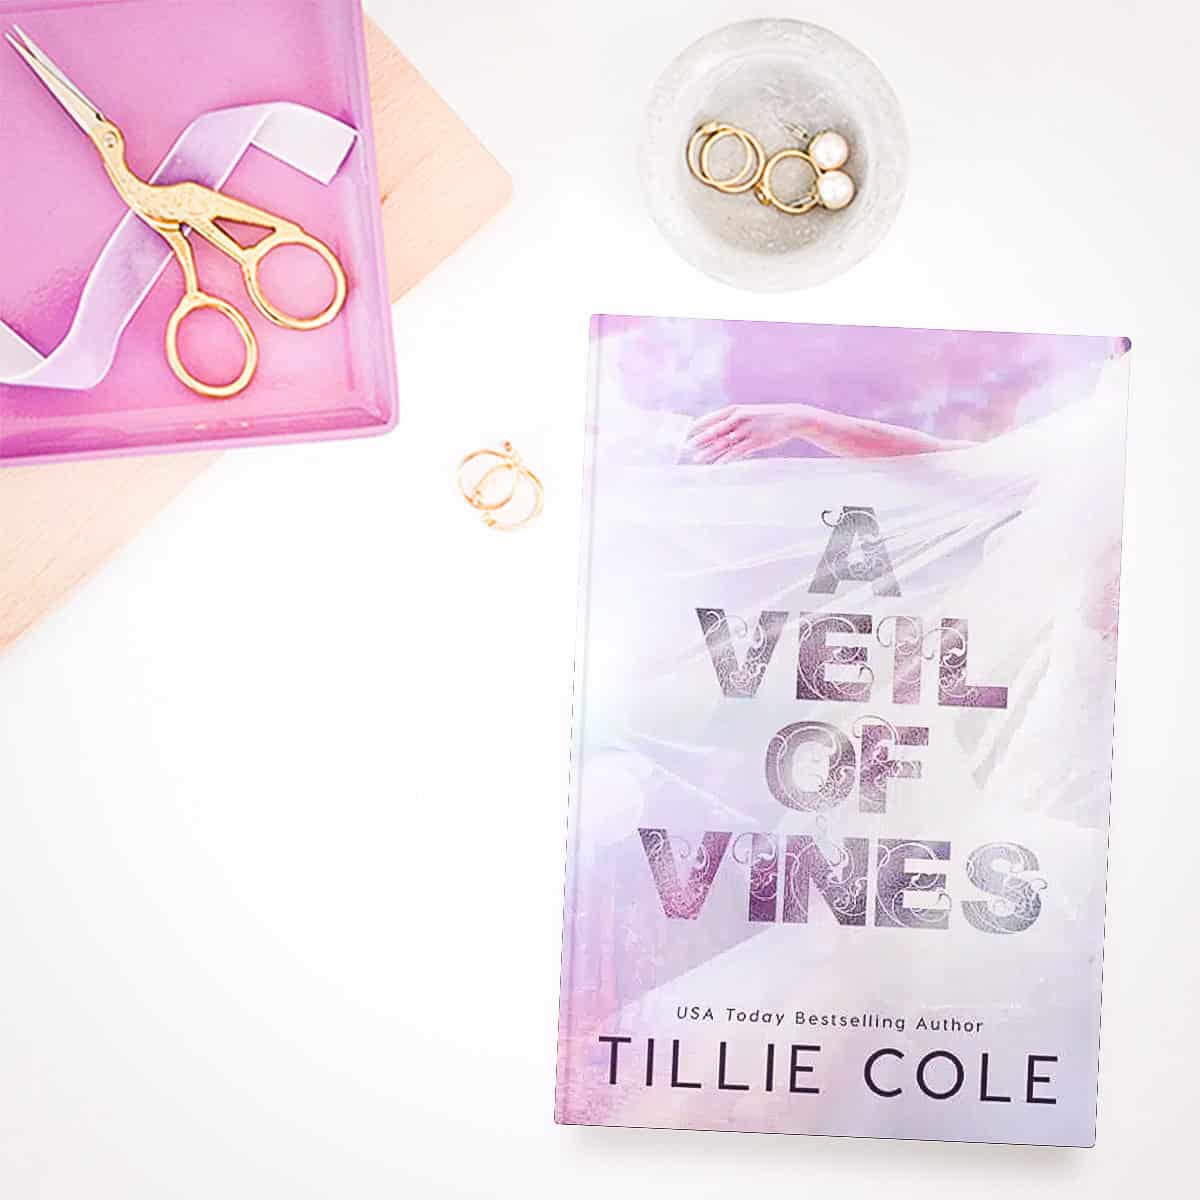 A Veil of Vines by Tillie Cole – Star-Crossed Lovers Royal Romance